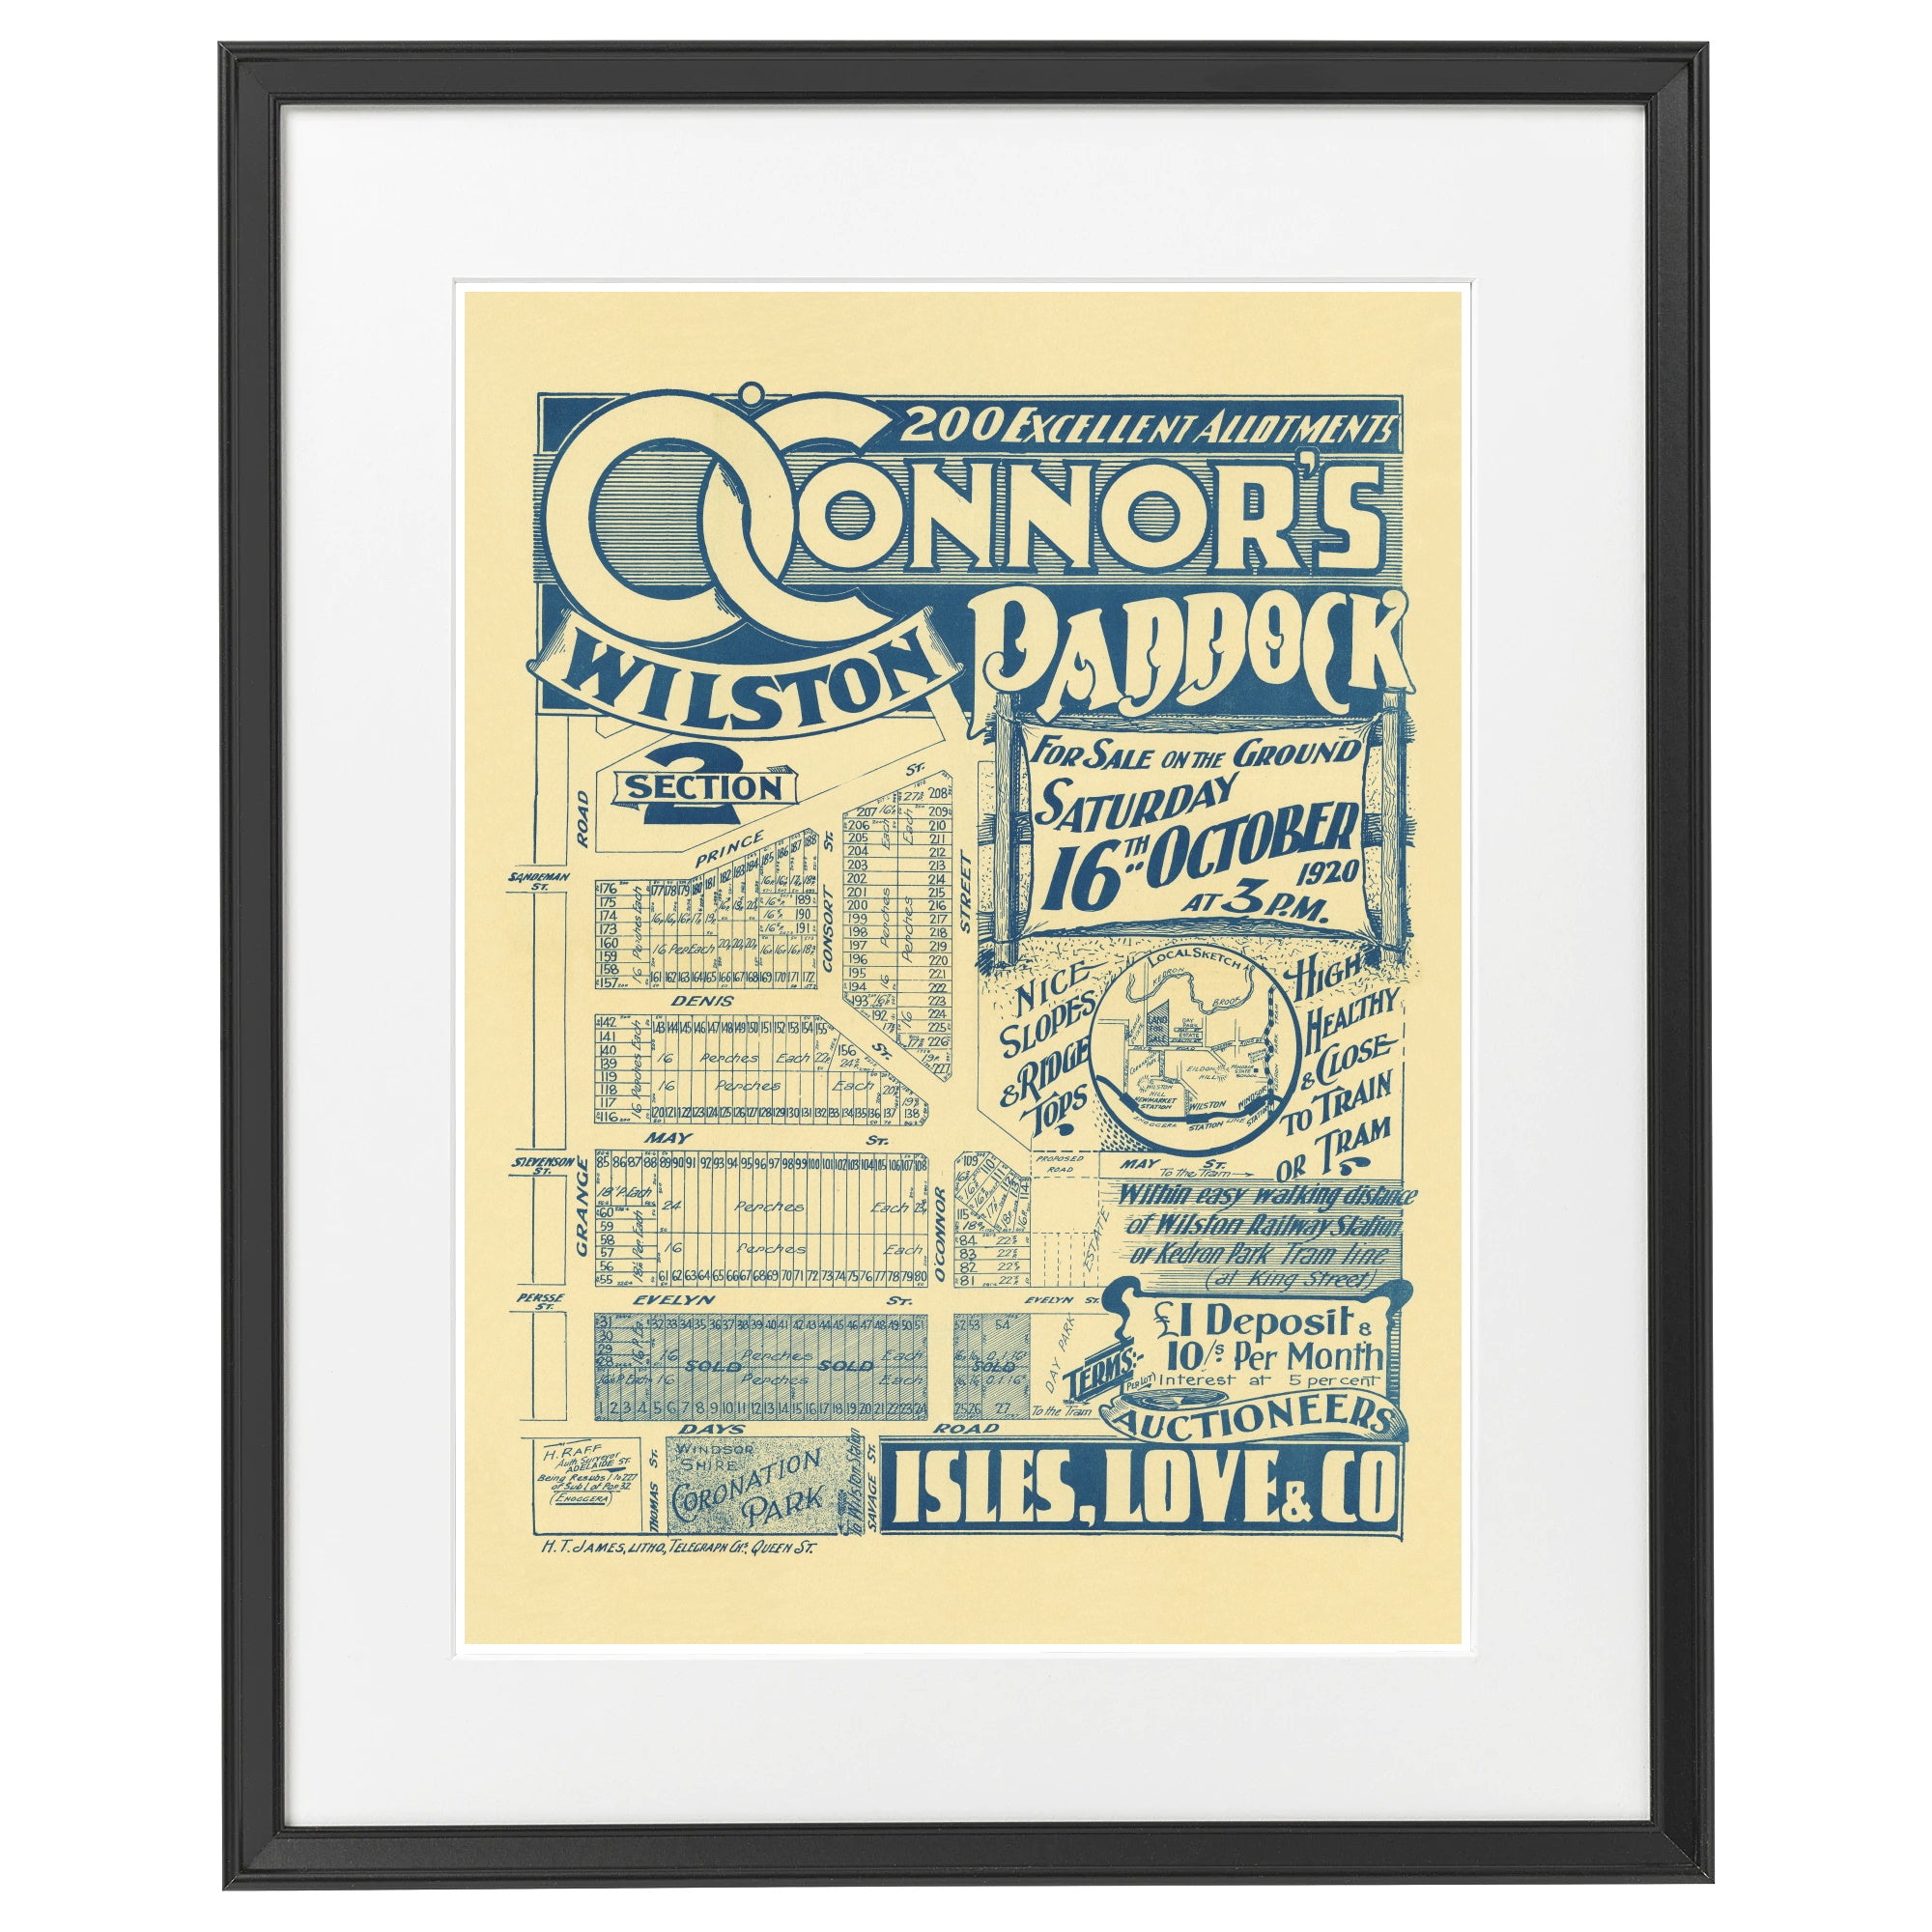 1920 O'Connor's Paddock - Section 2 - 102 years ago today